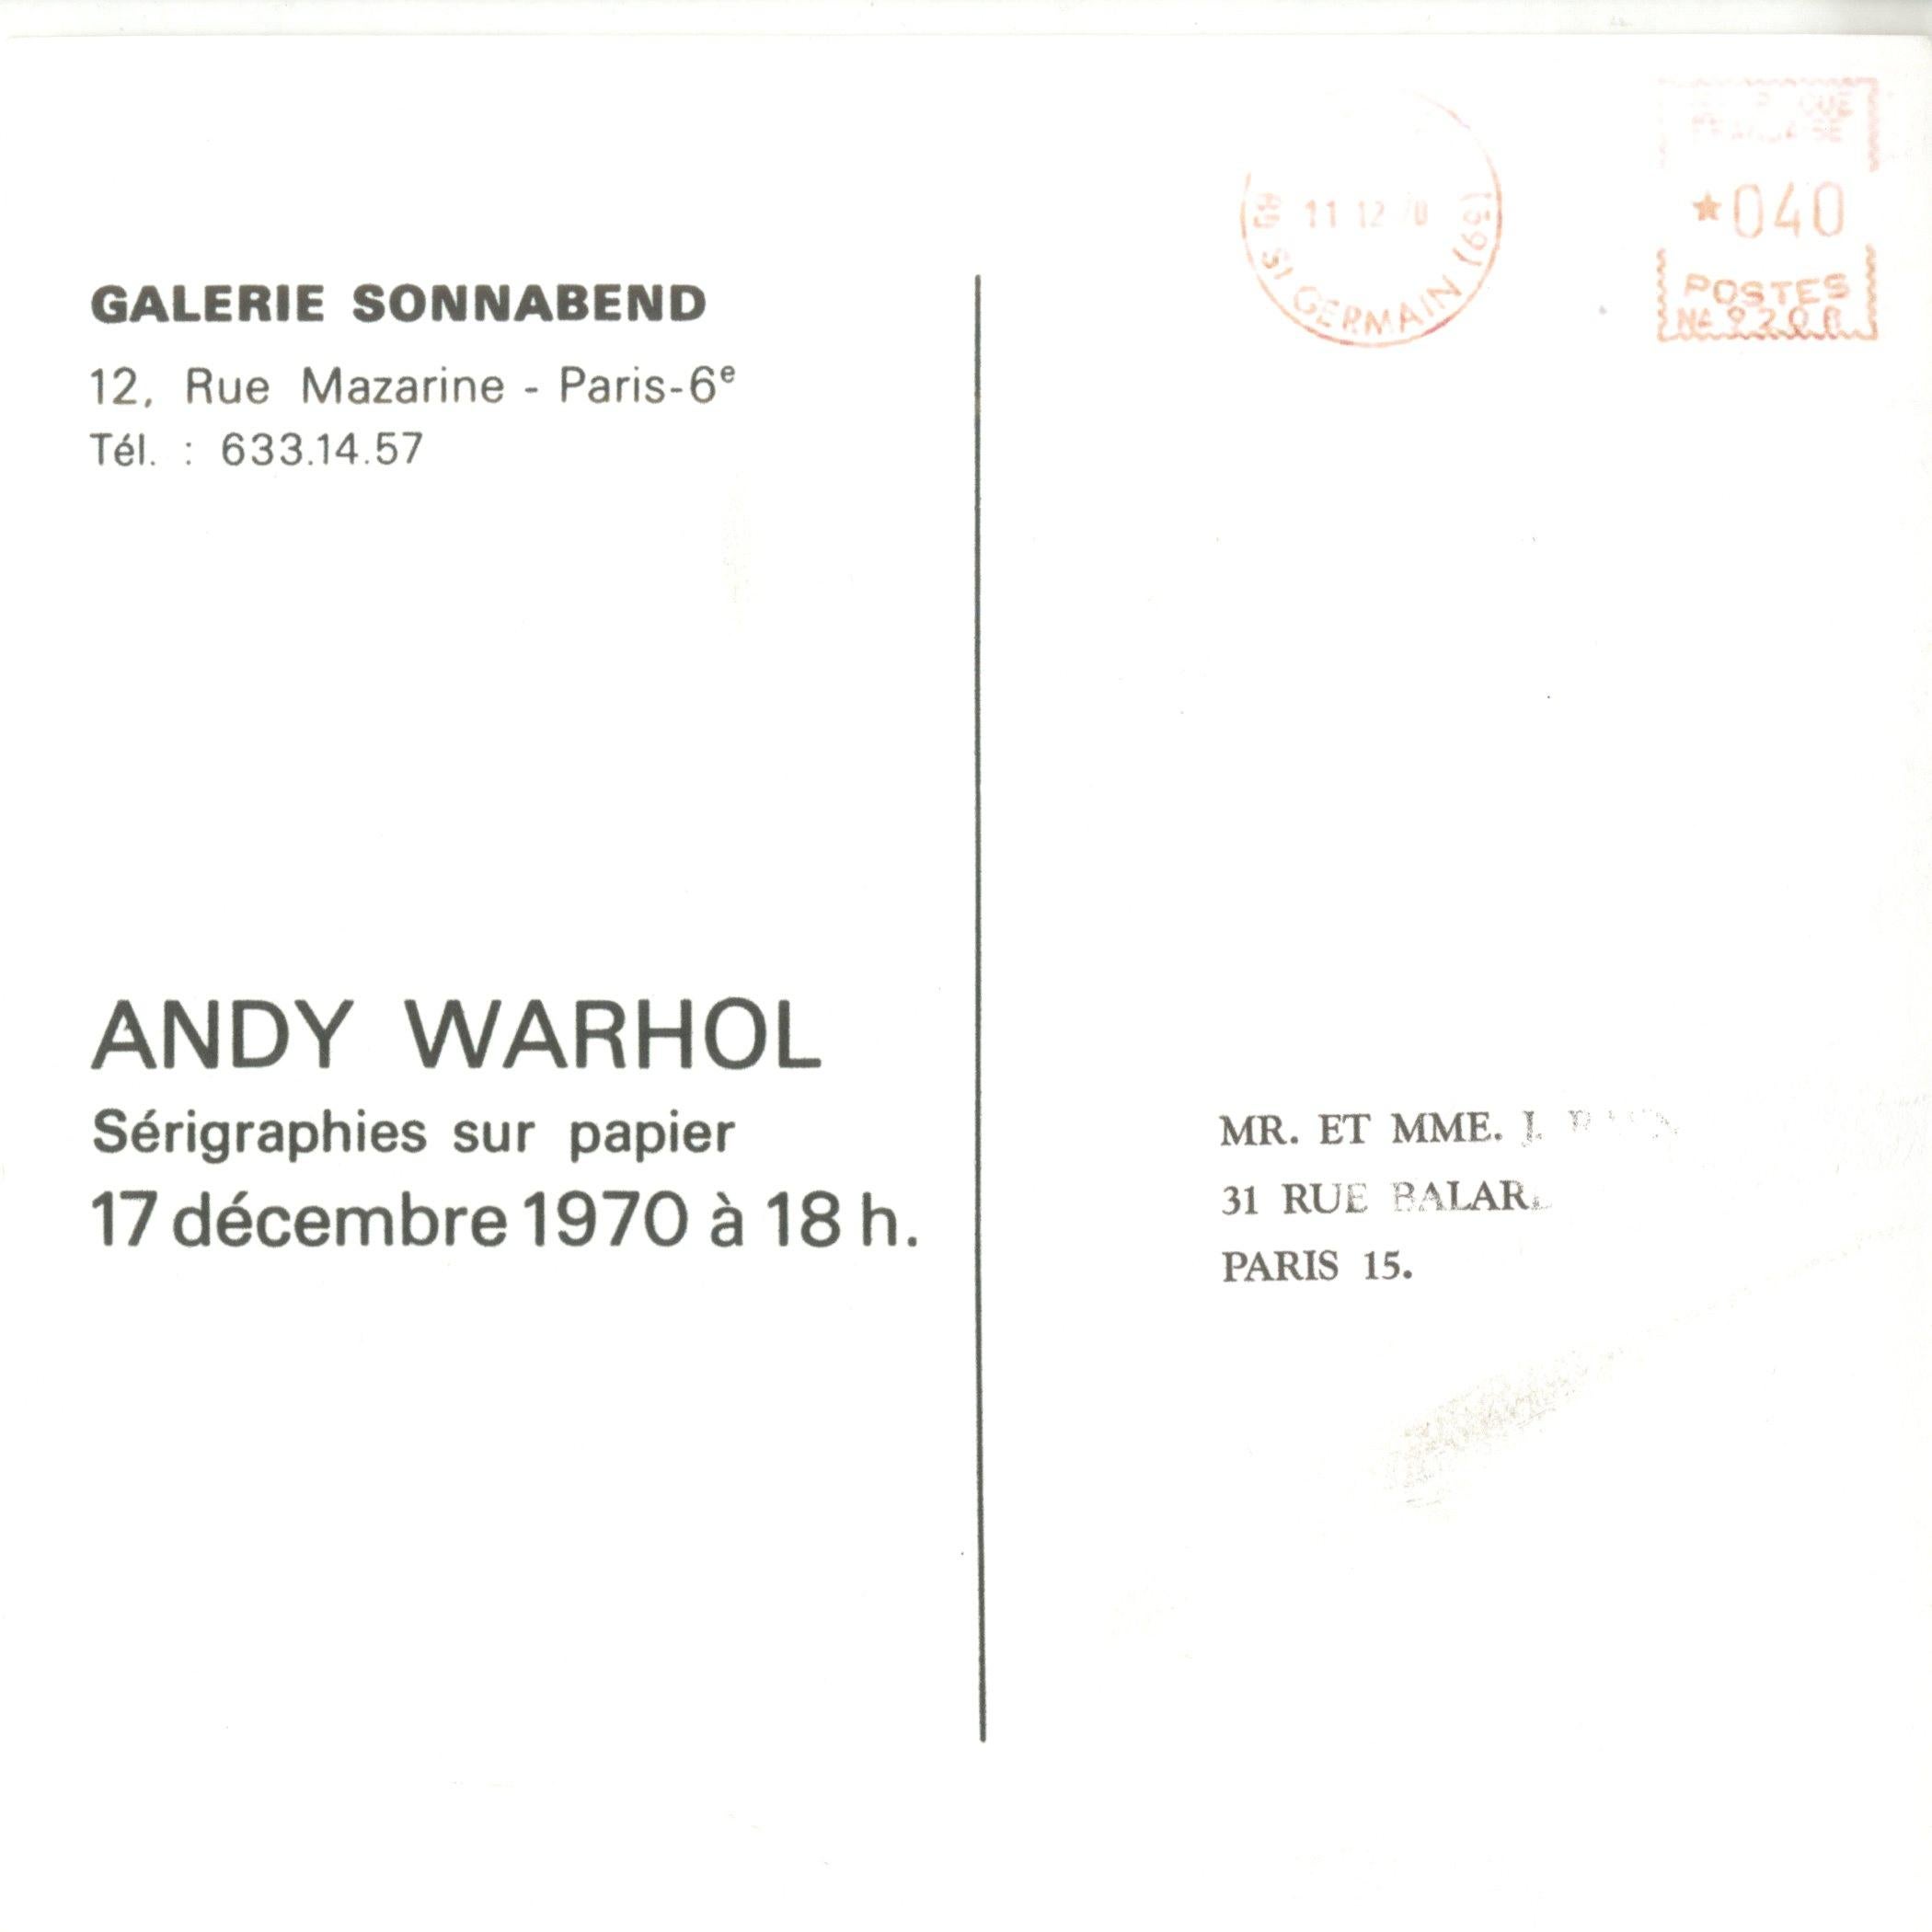 Flowers, Galerie Sonnabend announcement invitation card addressed with postmark - Pop Art Art by Andy Warhol